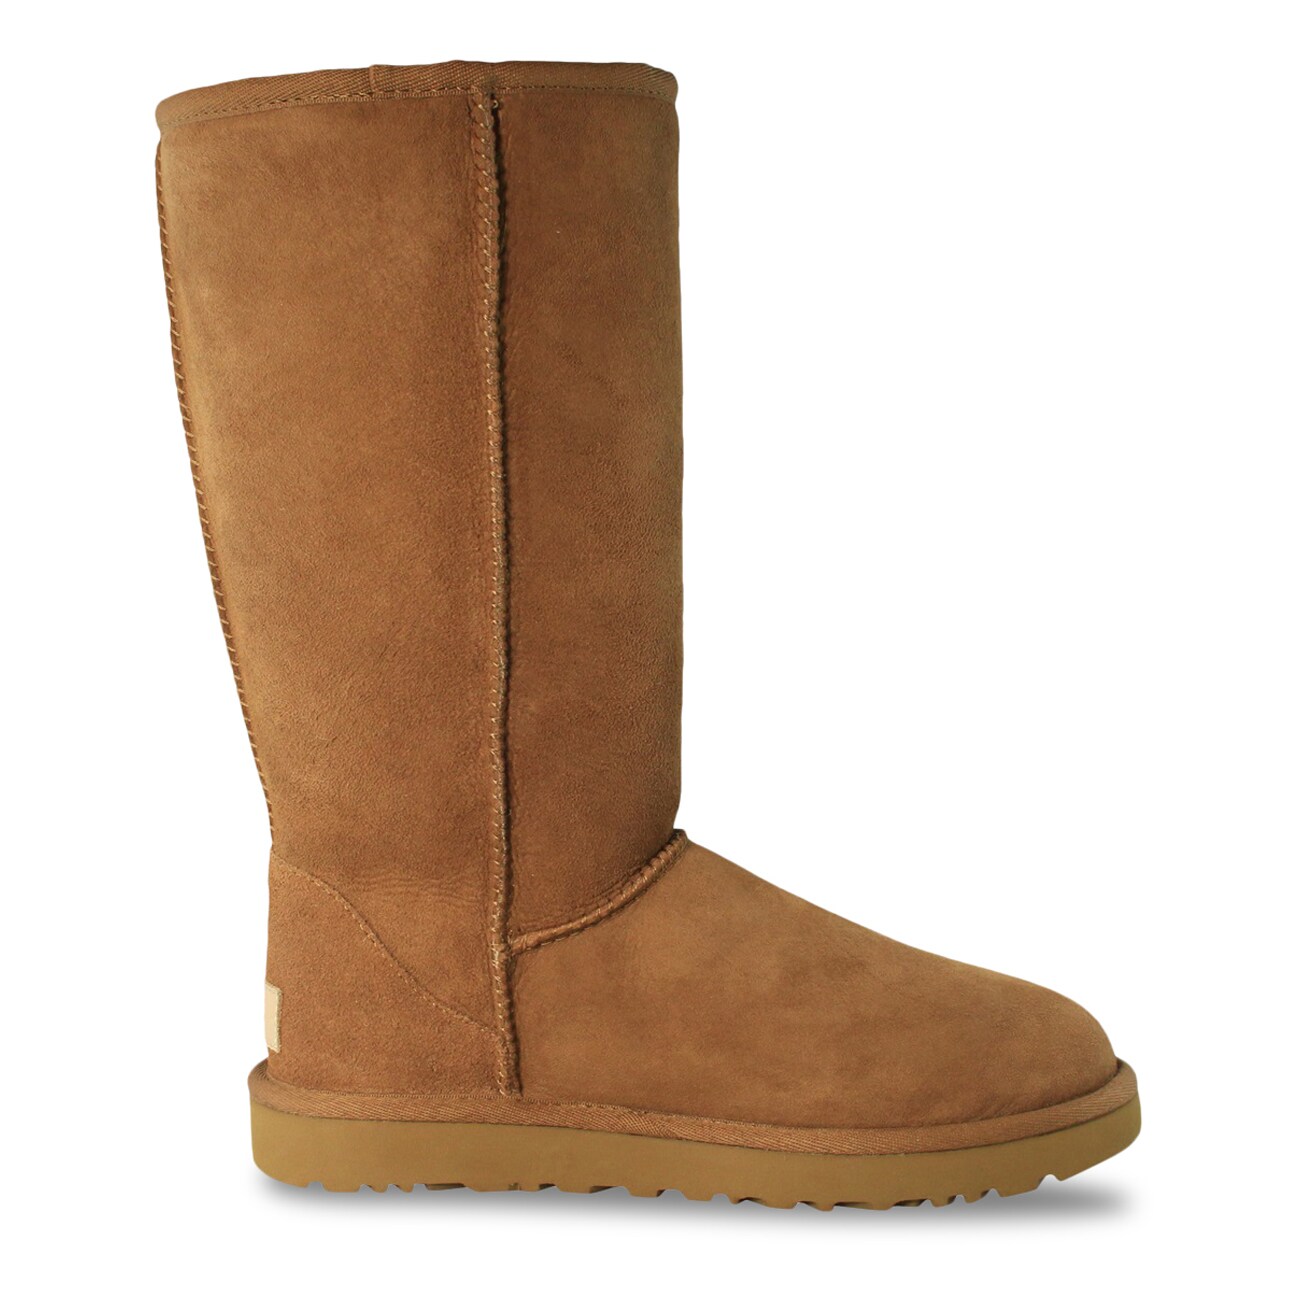 sole trader ugg boots